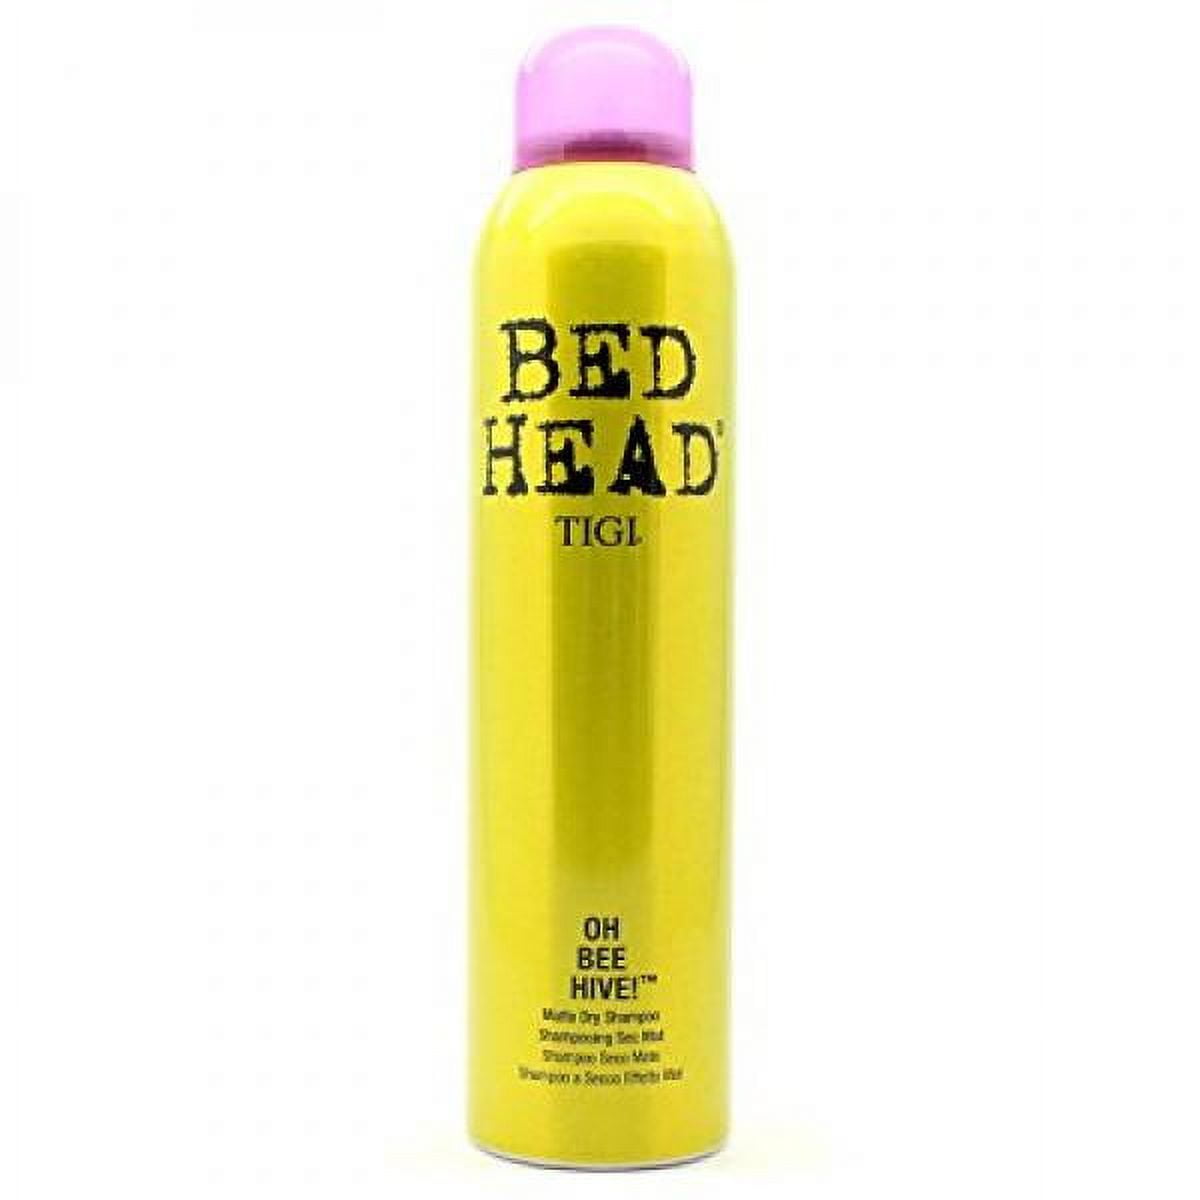 Tigi Bed Head Matte Dry Shampoo For Women Oh Bee Hive 5 Ounce